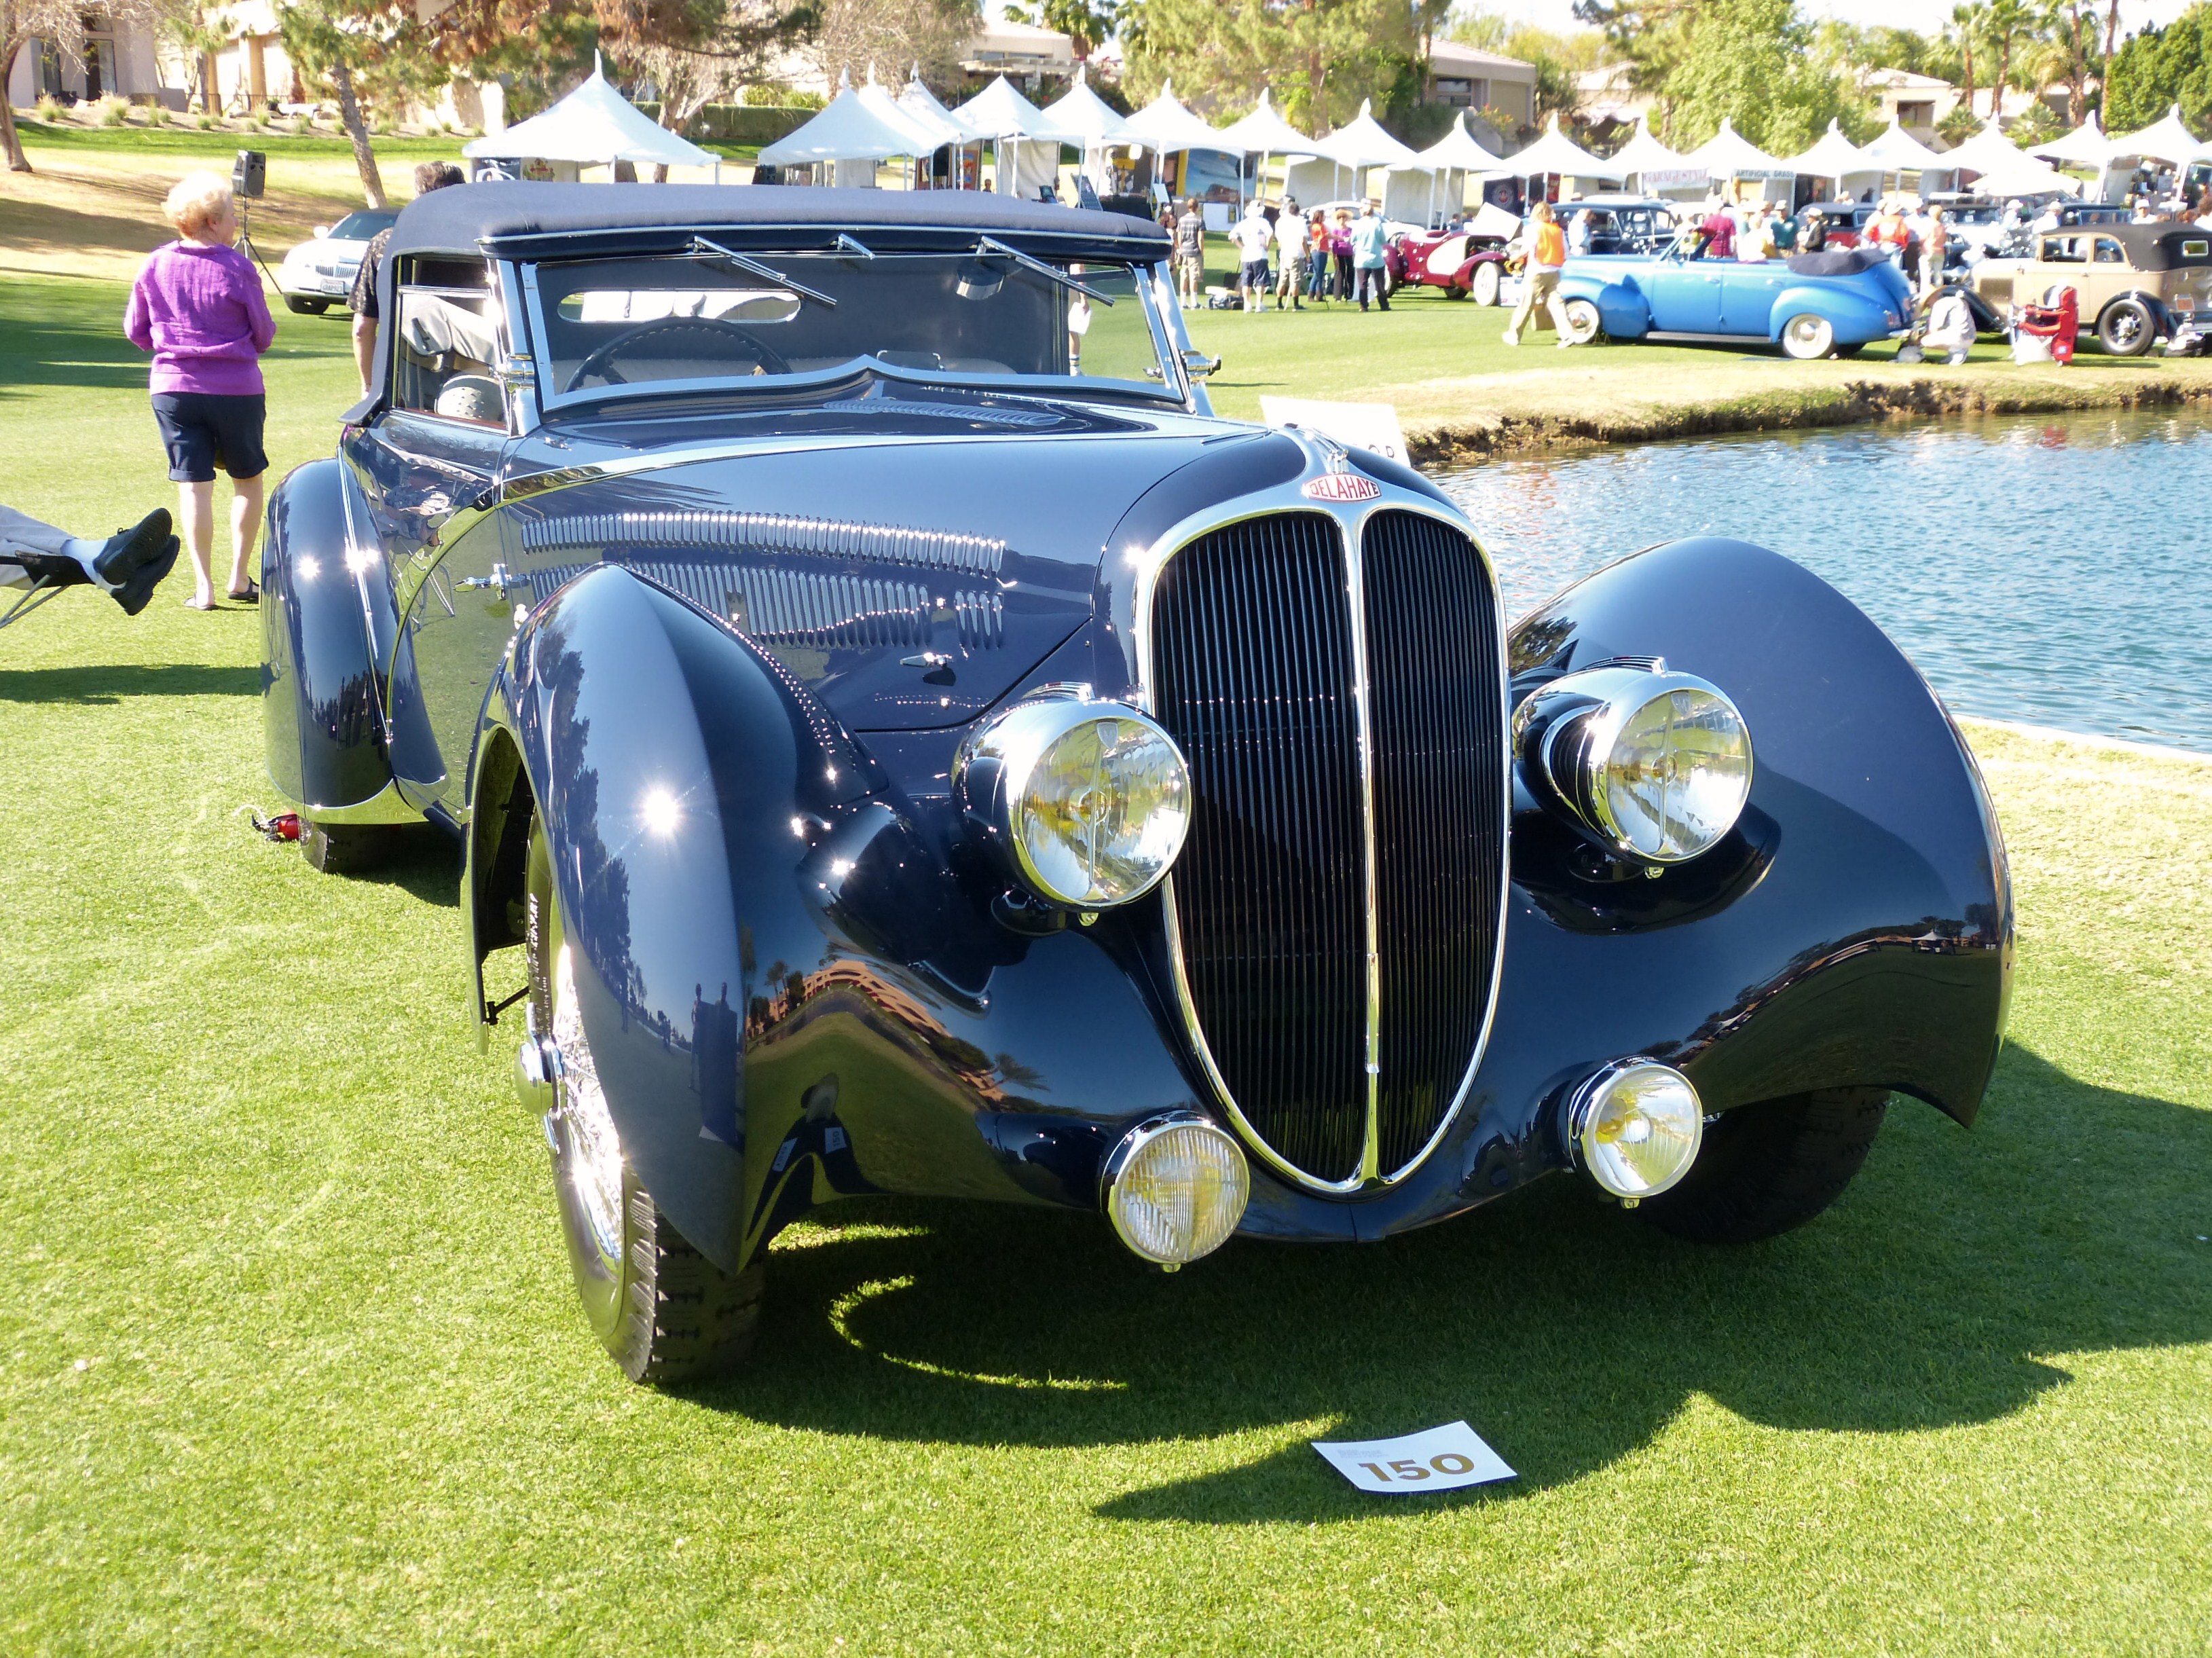 Shiny Things in the Sand: 2012 RANCHO MIRAGE DESERT CLASSIC CONCOURS D’ELEGANCE